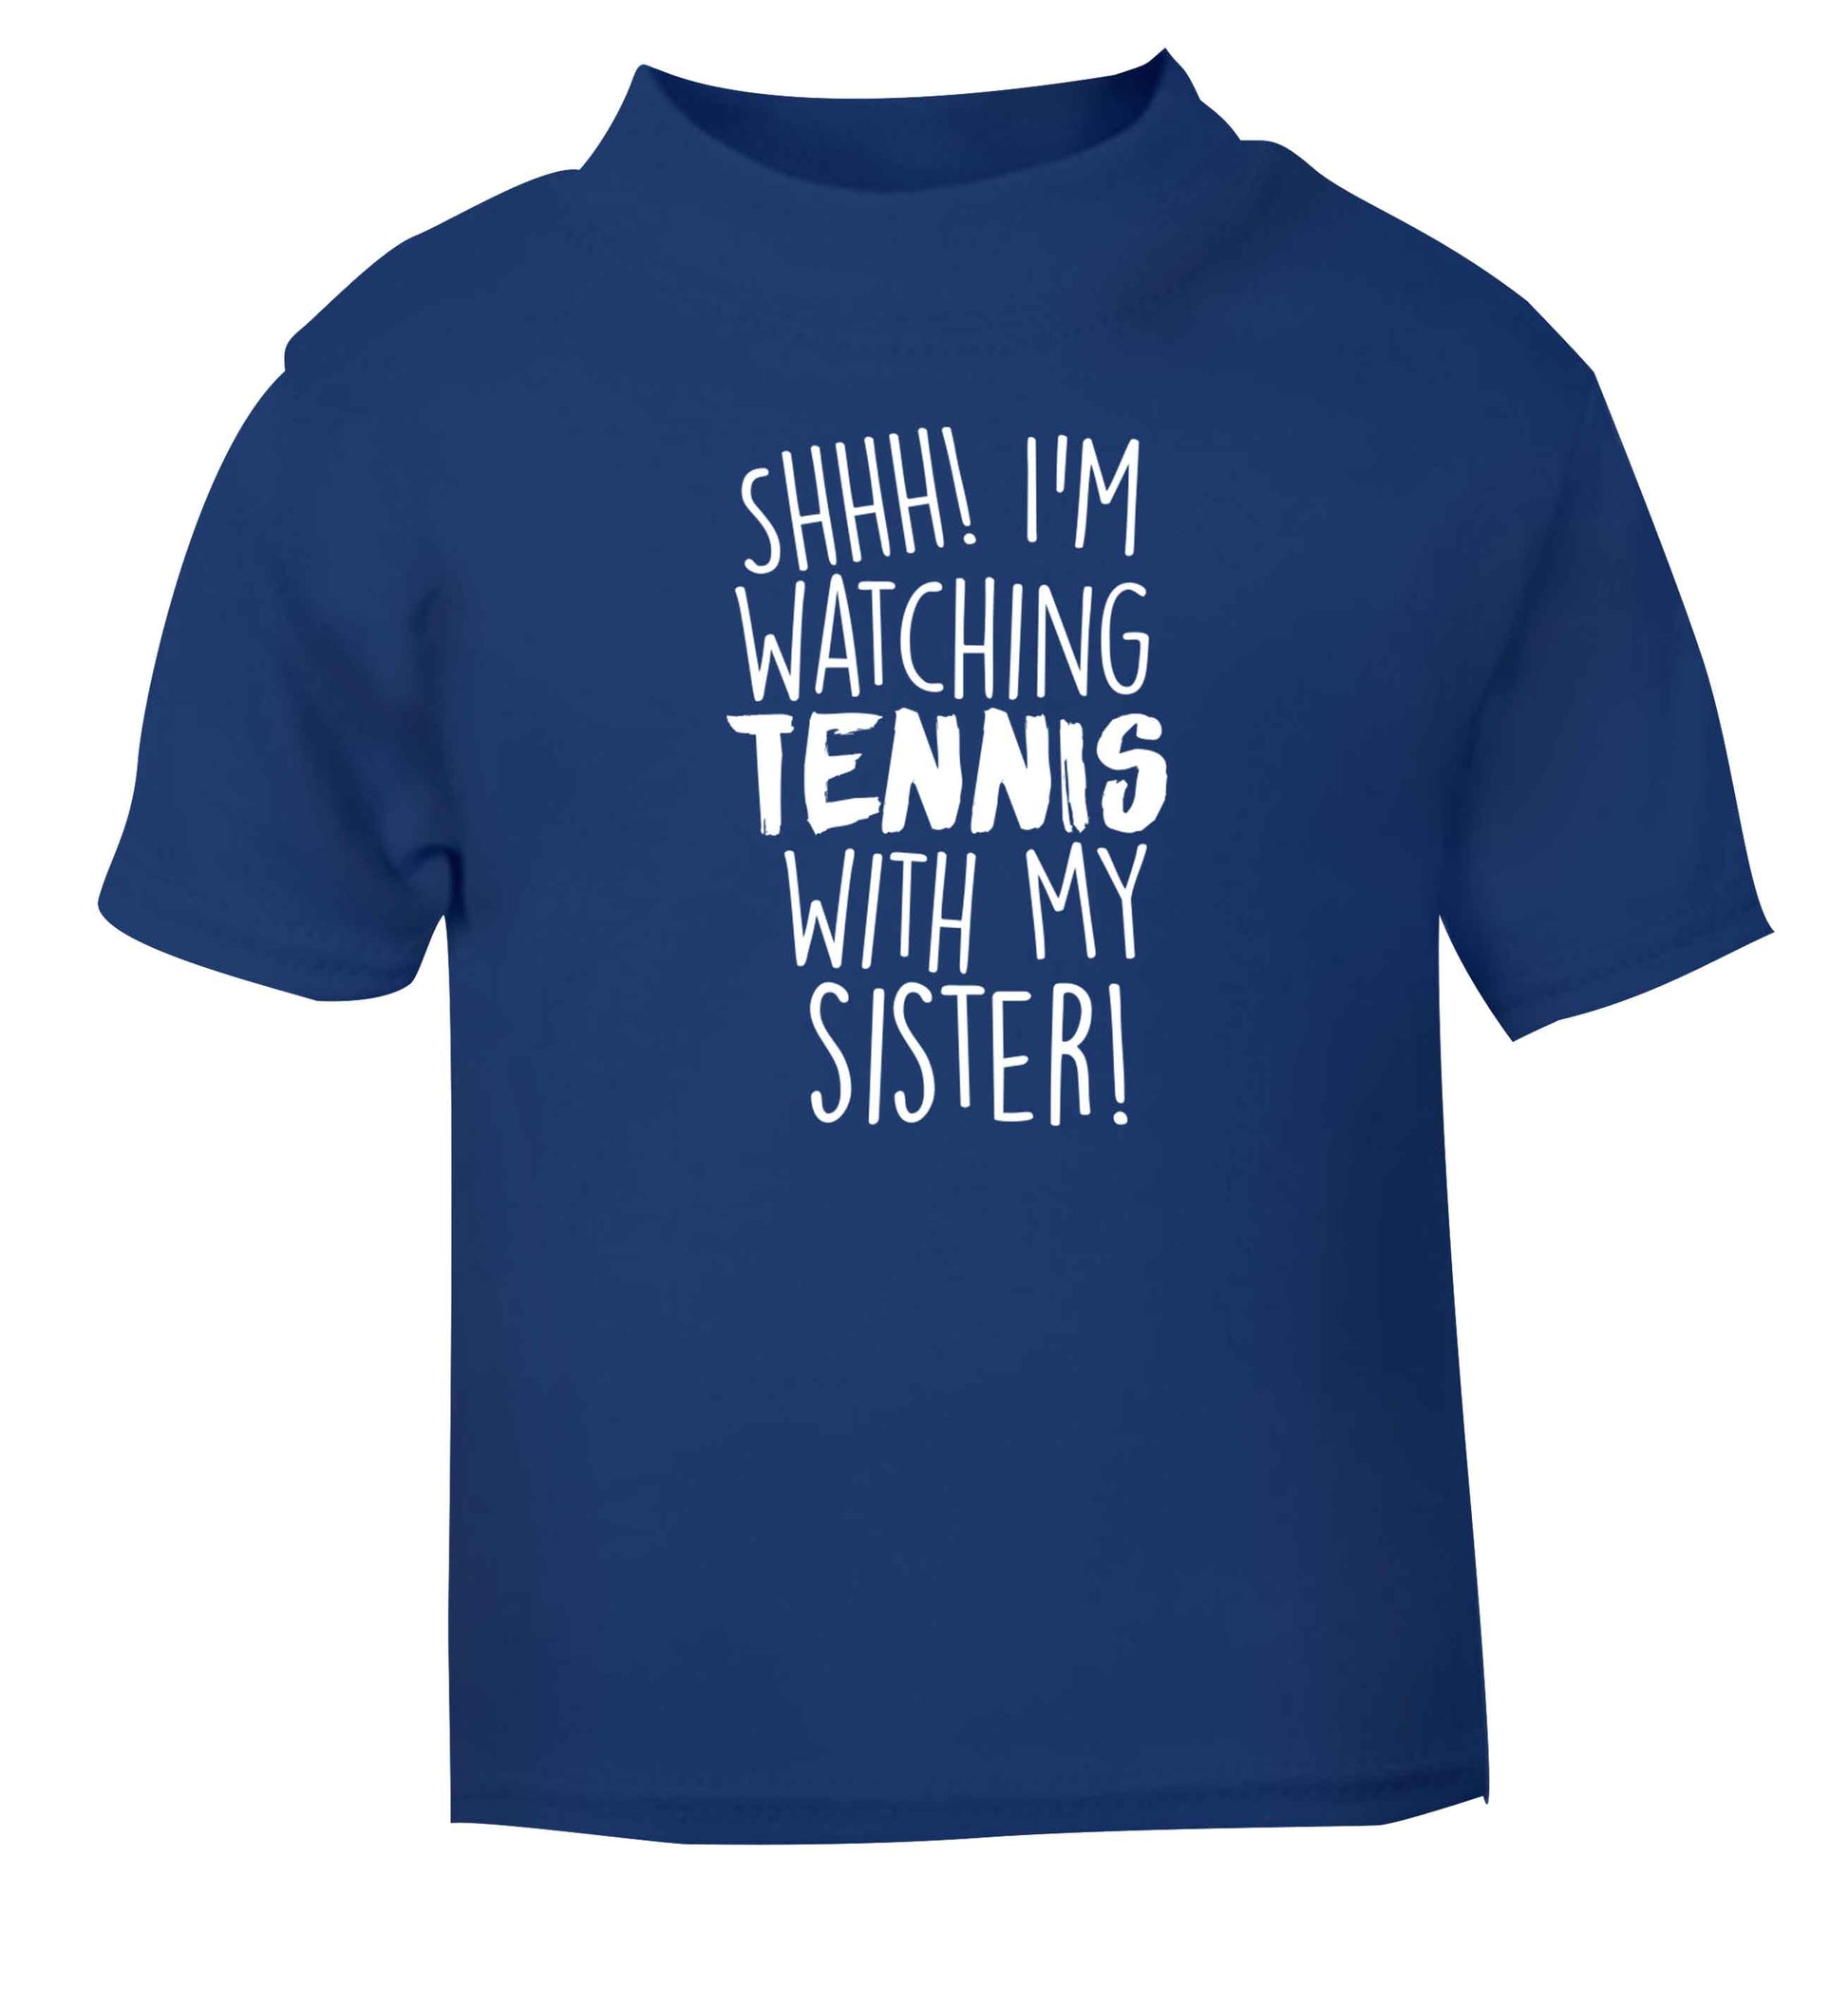 Shh! I'm watching tennis with my sister! blue Baby Toddler Tshirt 2 Years